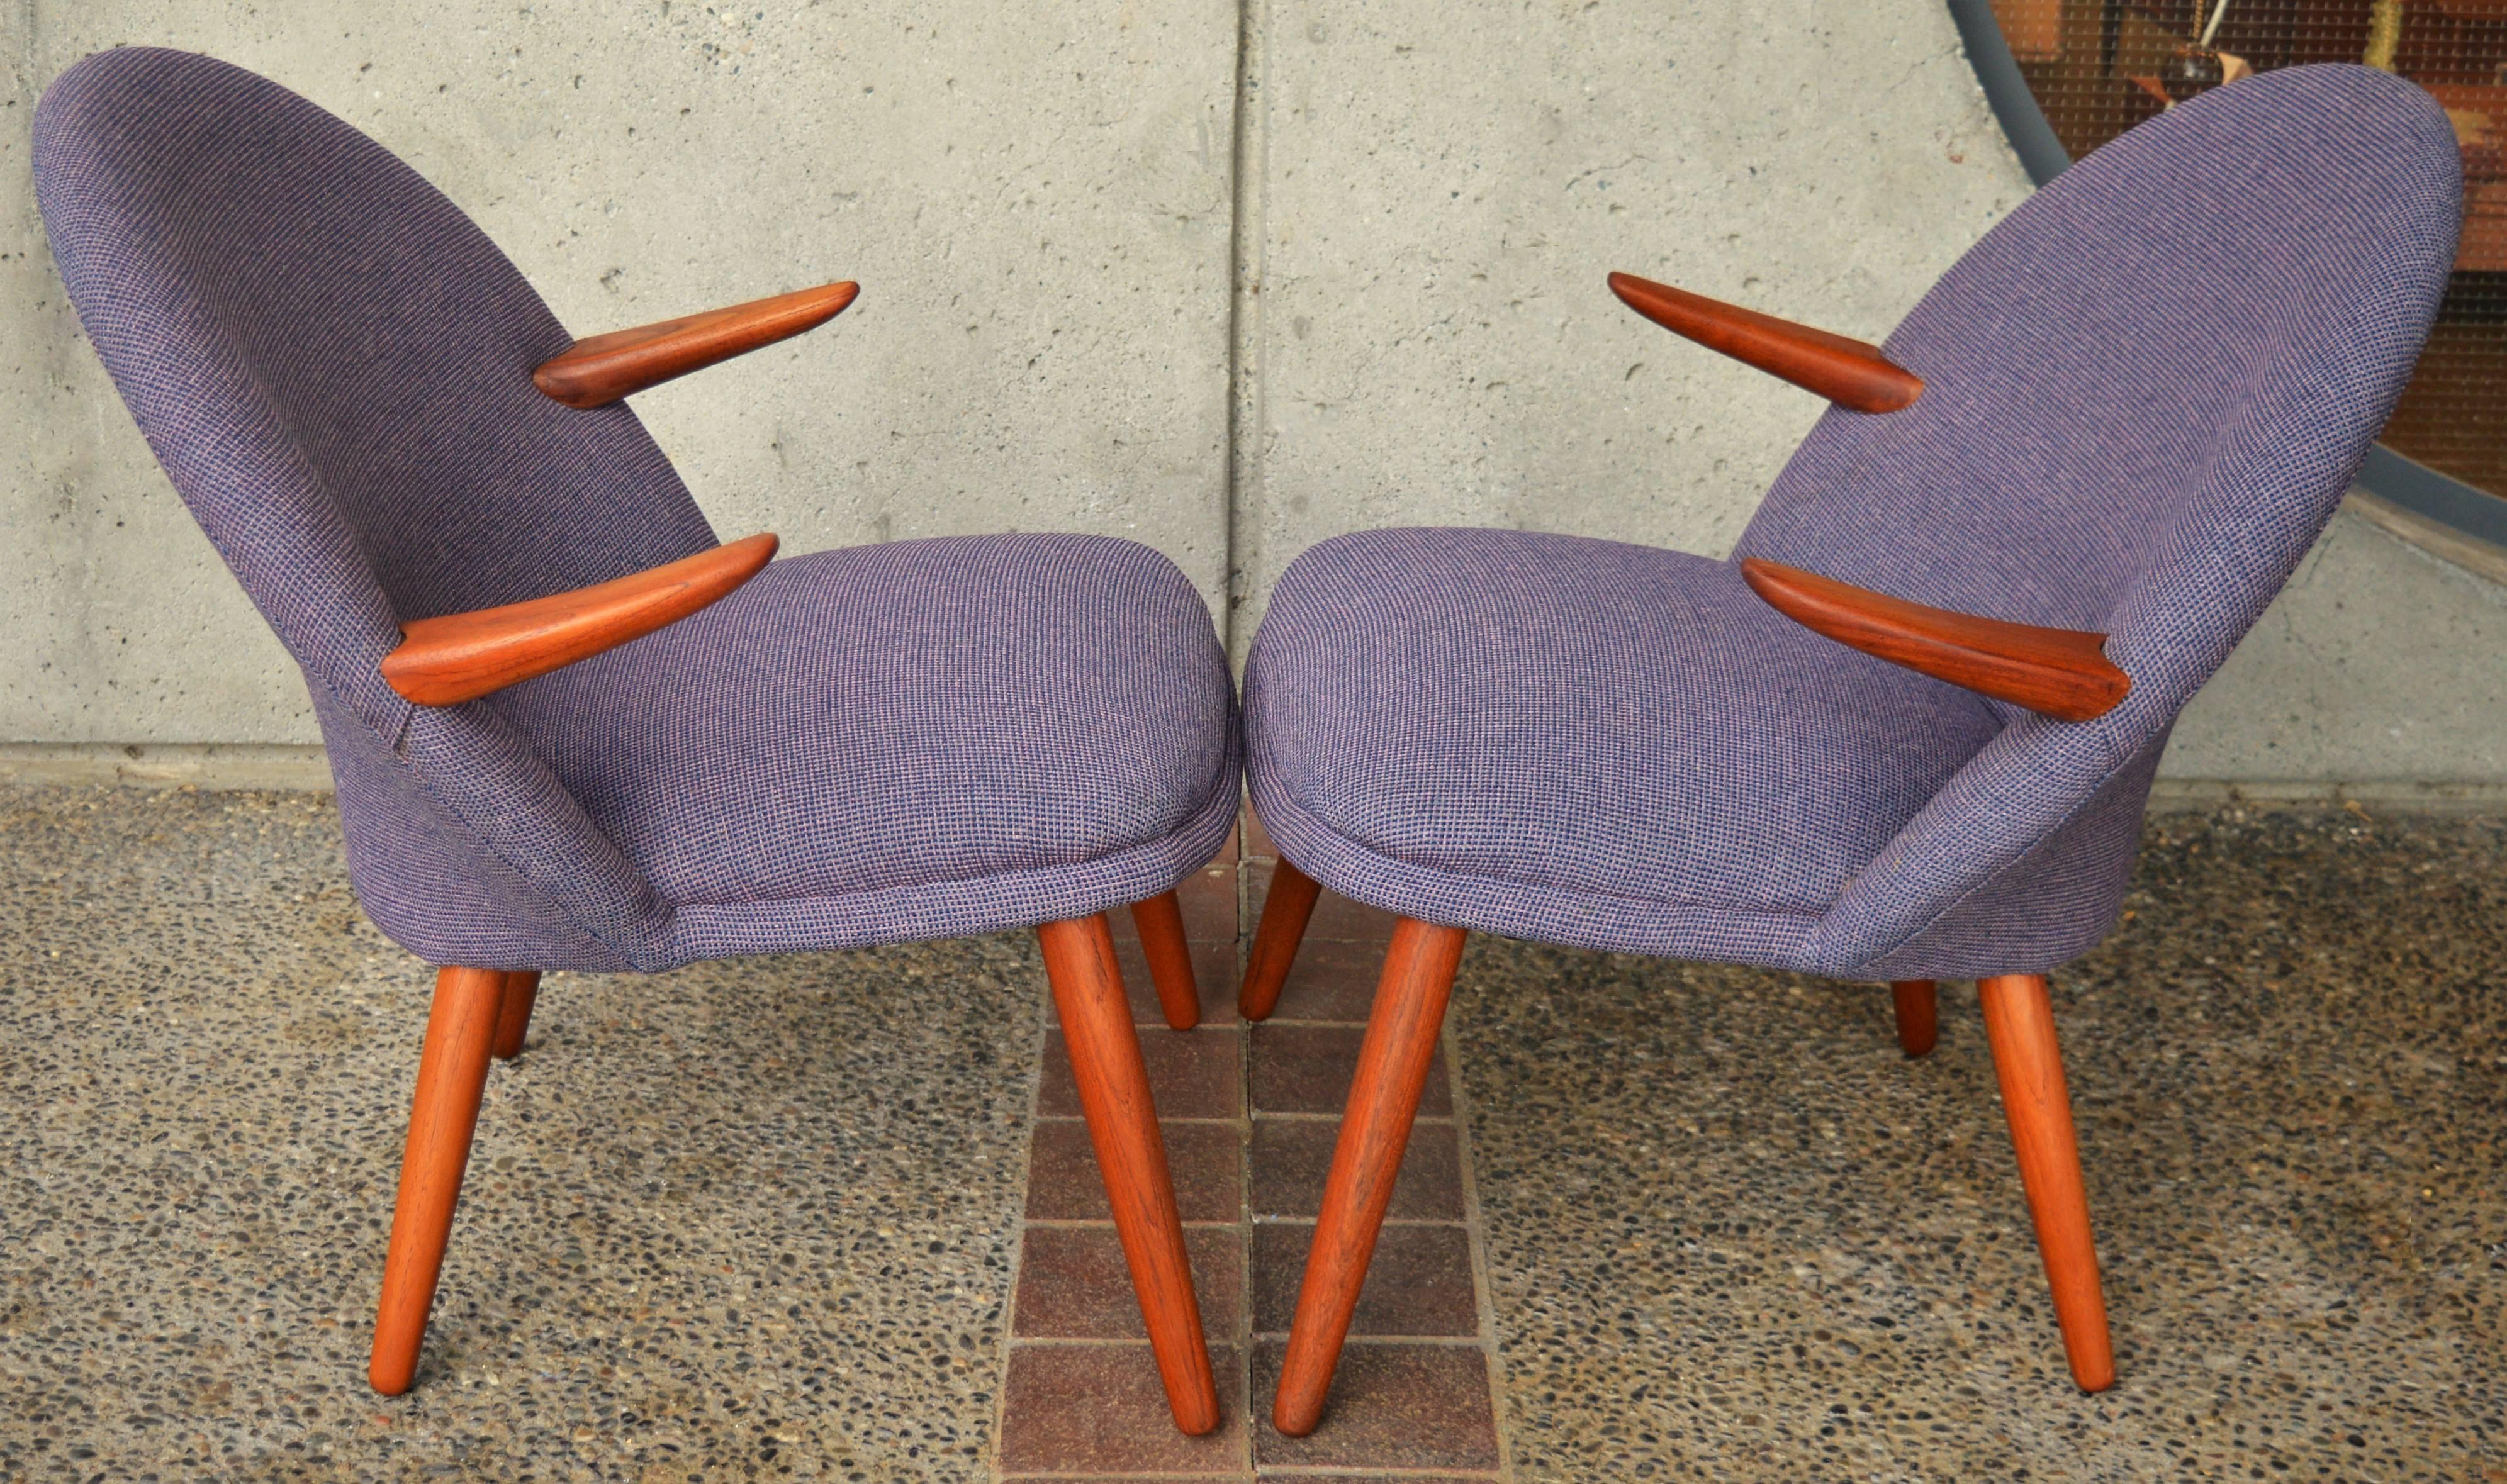 This delightful pair of whimsical Danish modern teak lounge chairs are a more petite profile, yet superbly comfortable. The playful teak armrests give them amazing character. Designed in the 1950s by Kurt Olsen for Glostrup Mobelfabrik. The recent